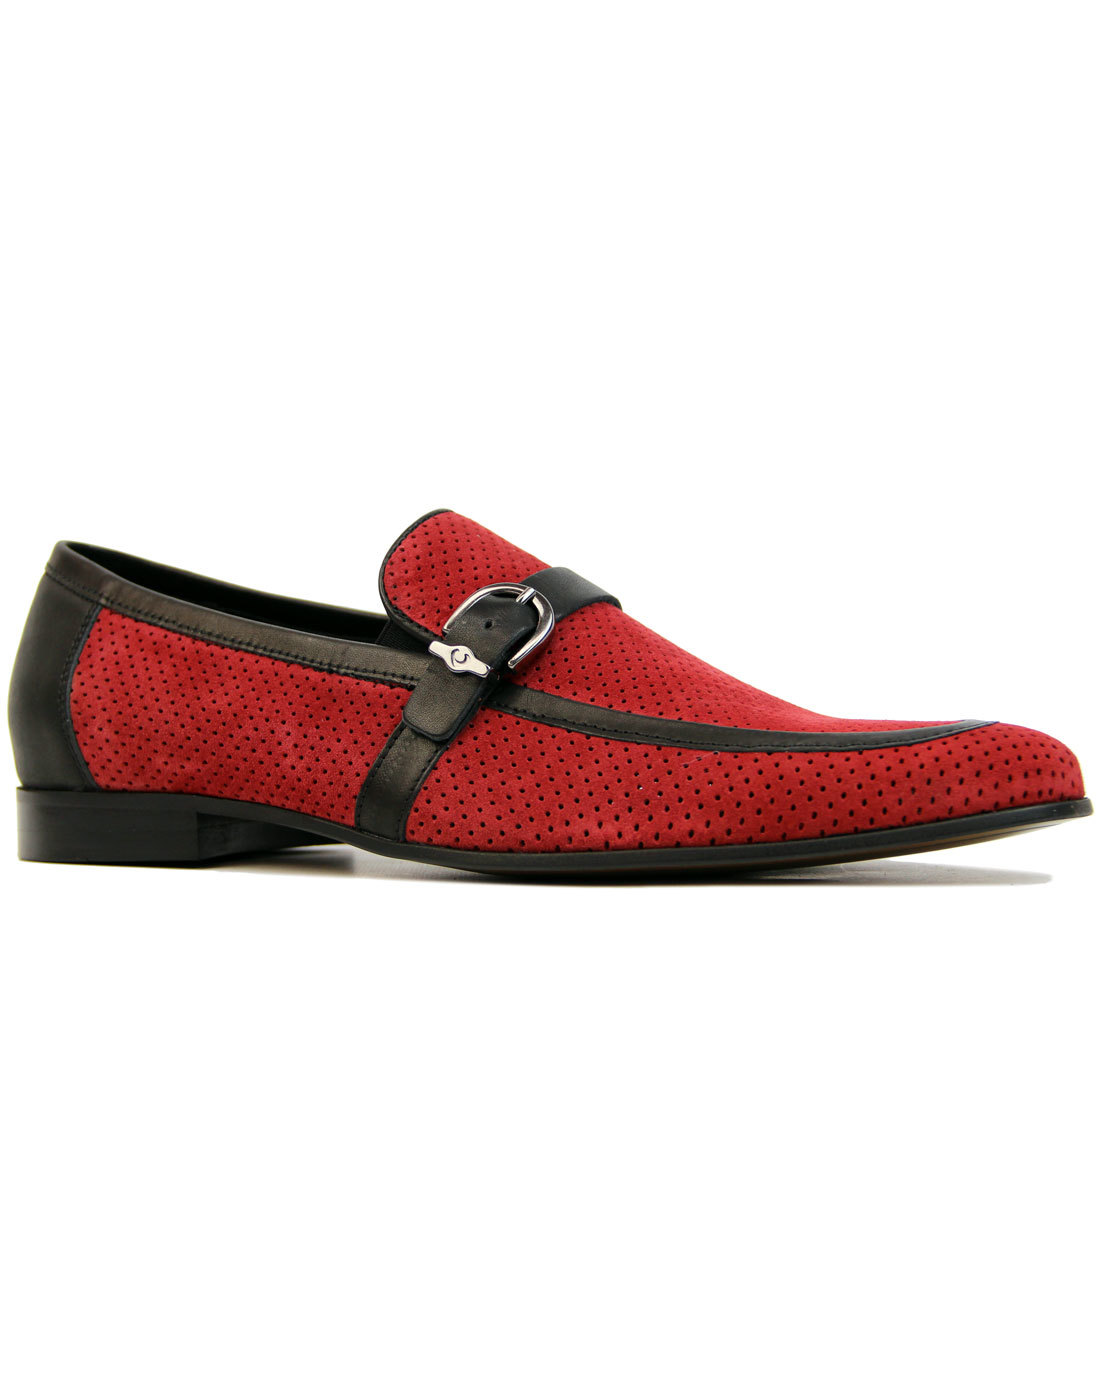 Lane LACUZZO 60s Mod Perf Two Tone Suede Loafers